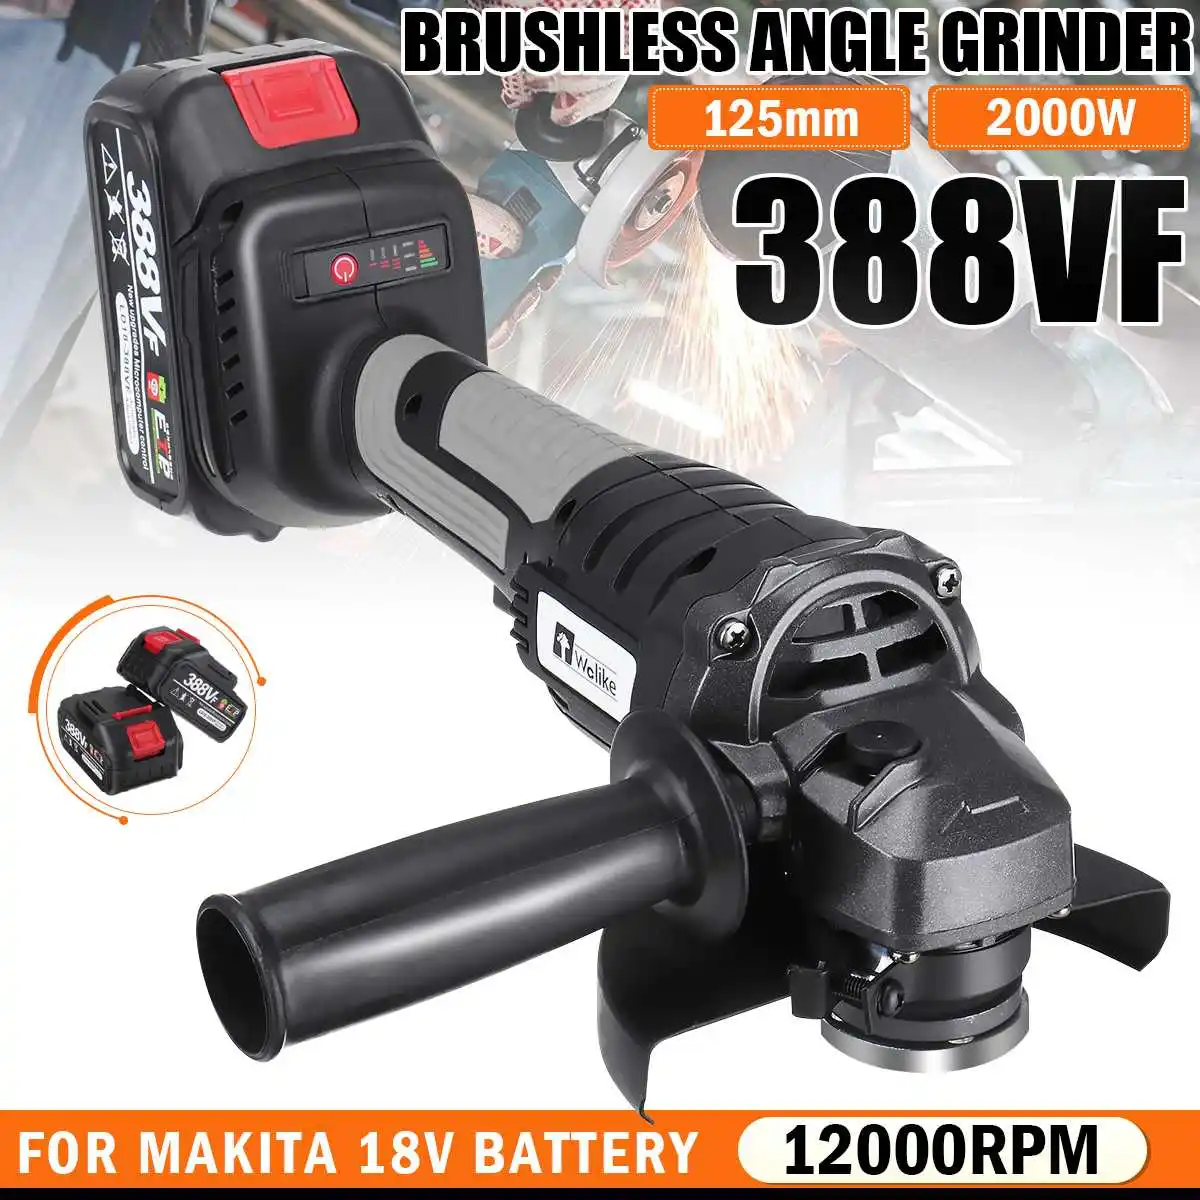 

Wolike 12000RPM 2000W Brushless Cordless Electric Angle Grinder 125mm Variable Speed Grinder Machine For Makita 18V Battery